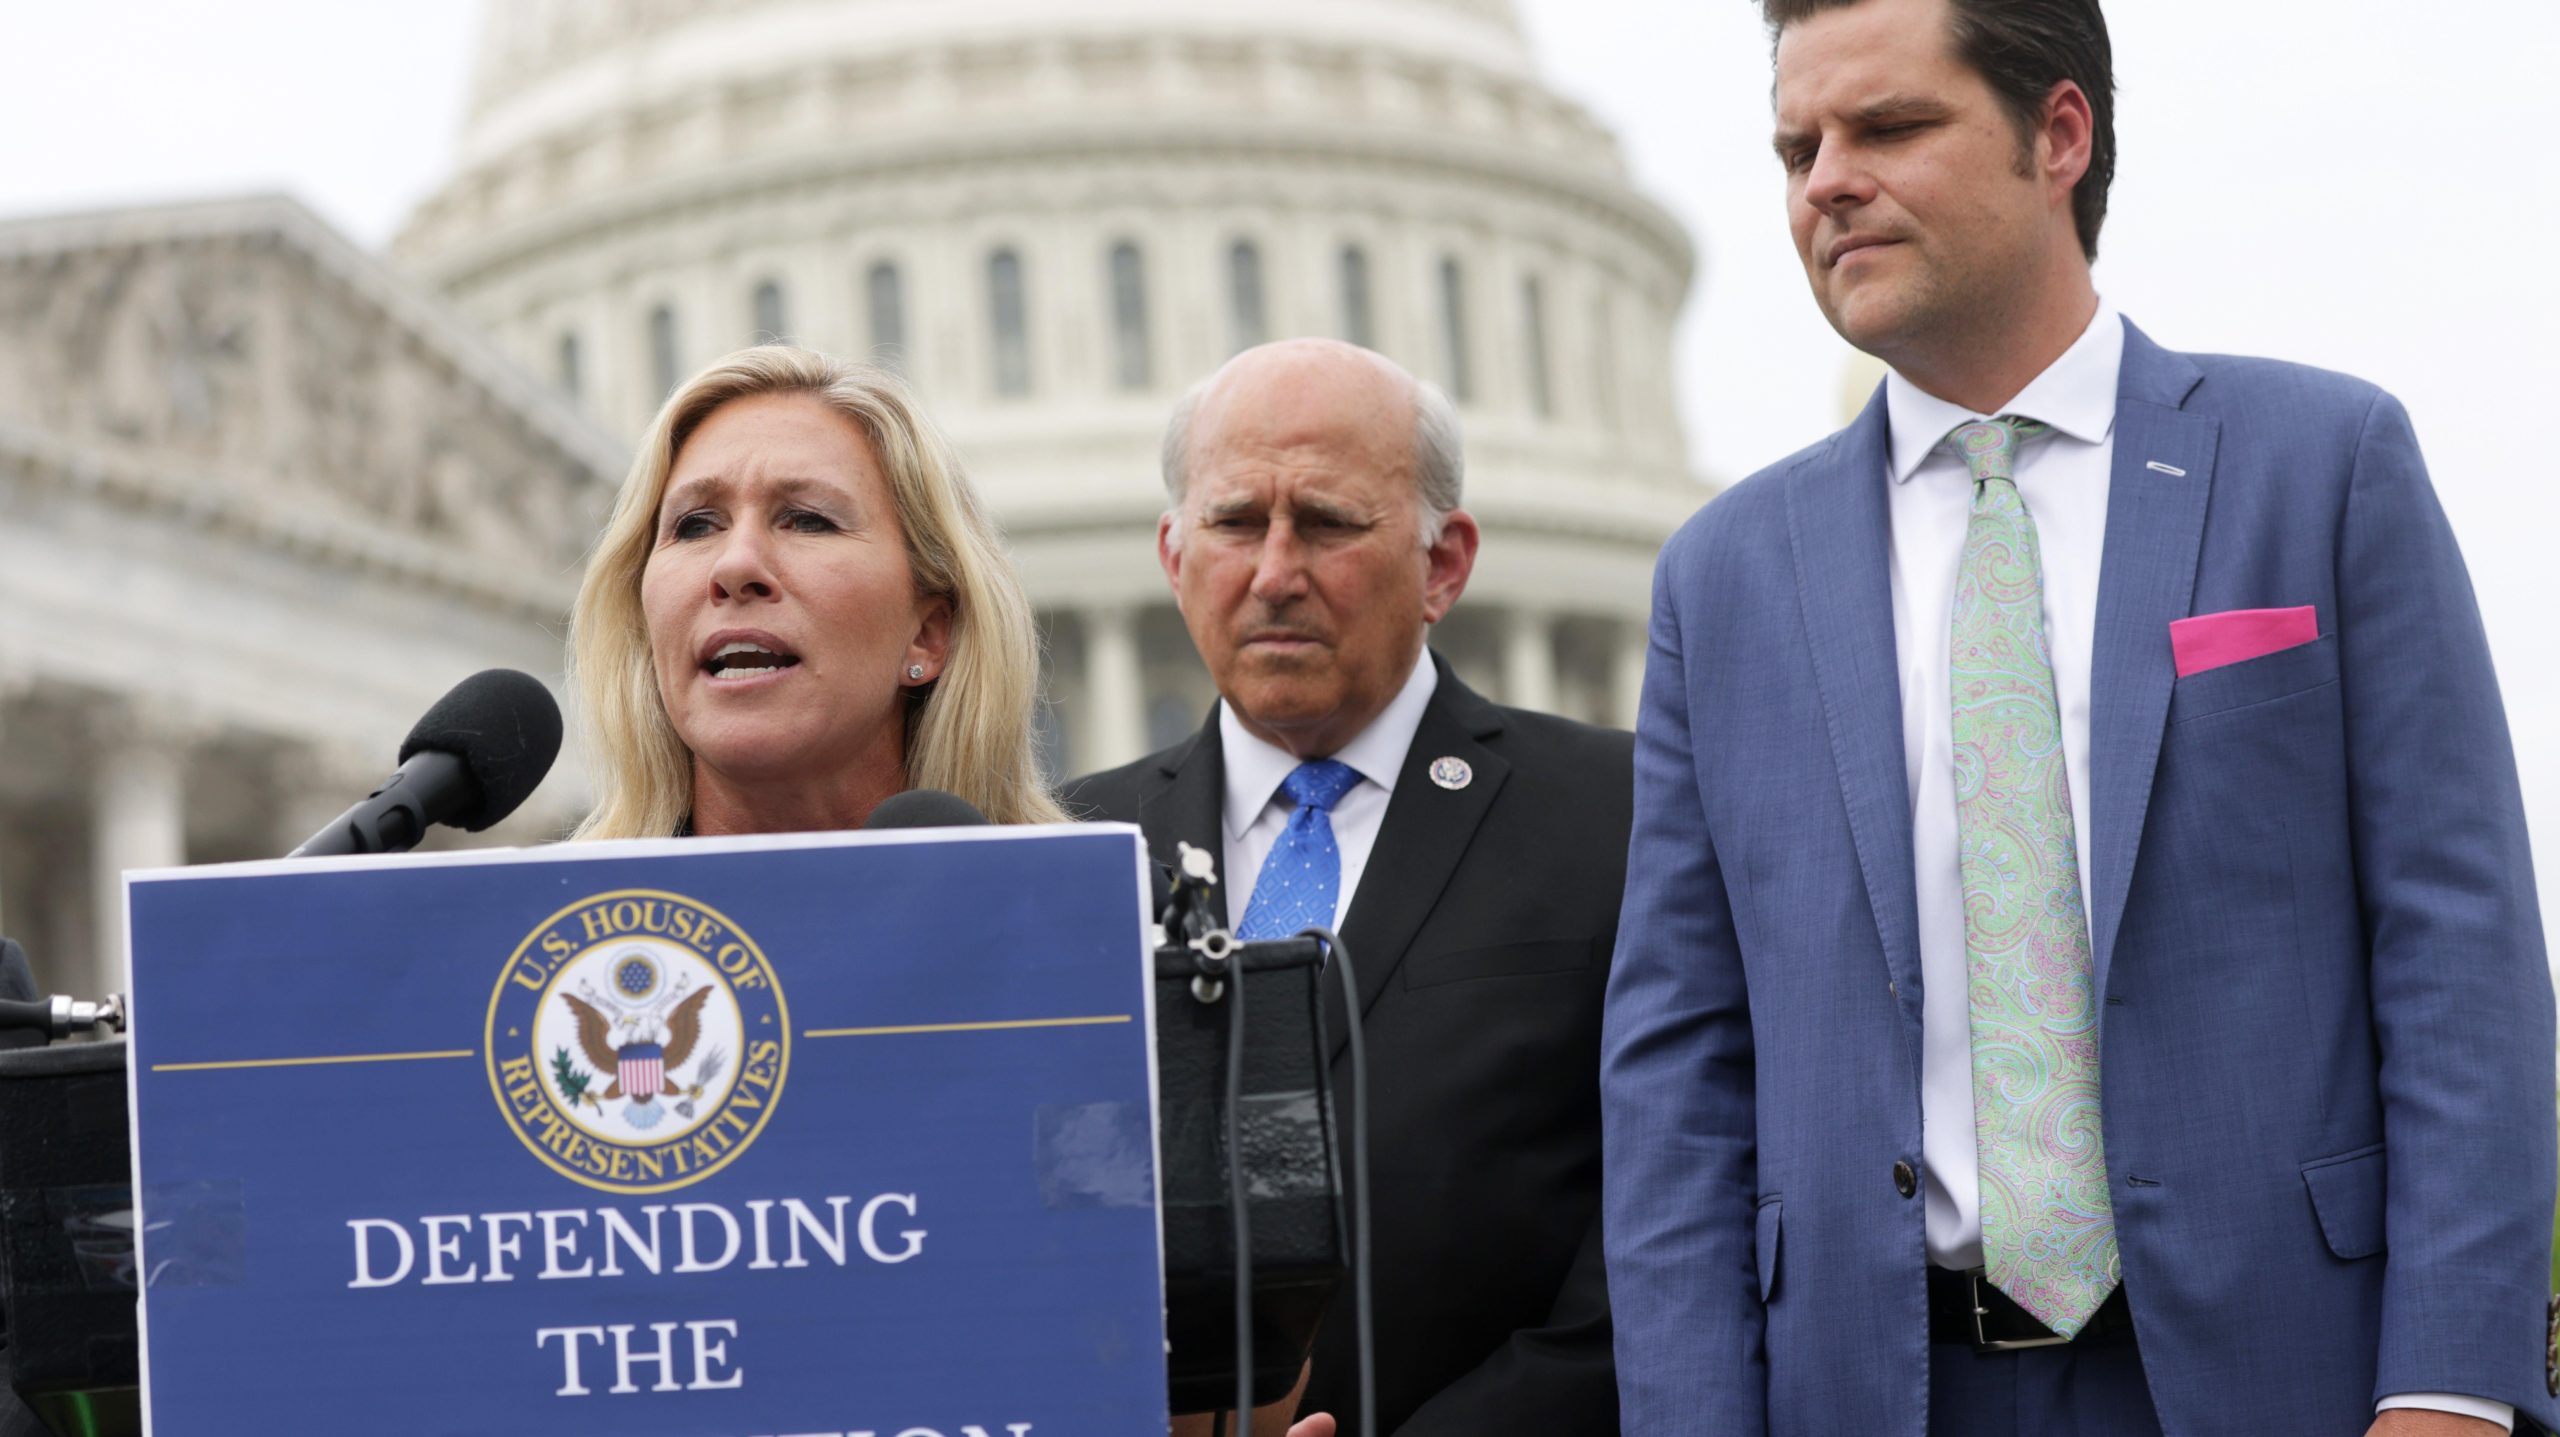 QAnon-loving Representative Marjorie Taylor Greene, left, far-right Representative Louie Gohmert, centre, and possible sex trafficking suspect Representative Matt Gaetz, right, at a news conference outside the U.S. Capitol on July 29, 2021. (Photo: Alex Wong, Getty Images)